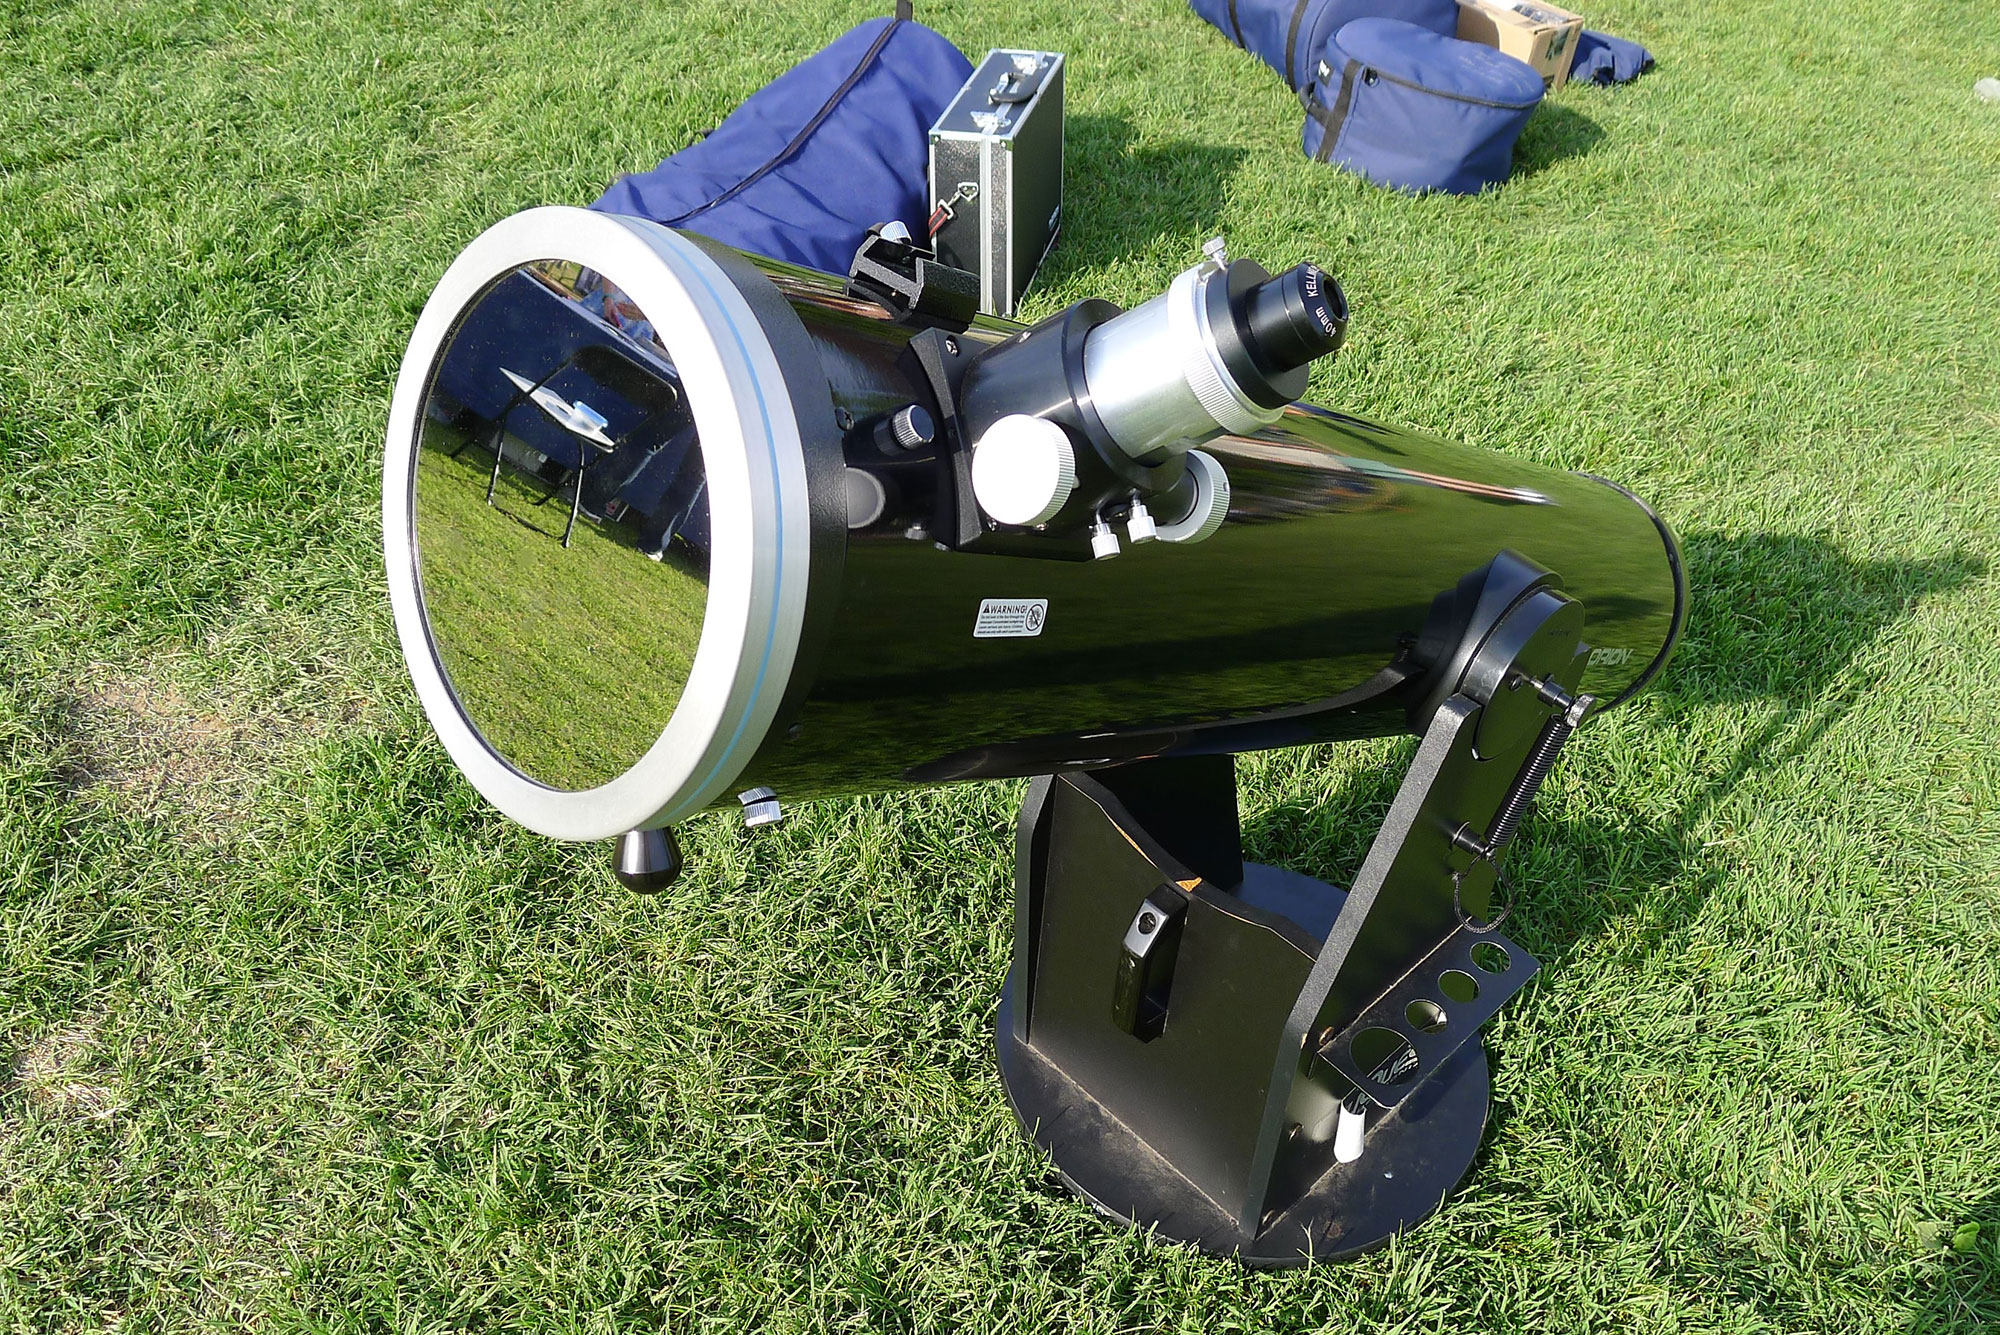 A black telescope sits on grass. On the left end of the telescope, which is pointed slightly upward, is a round cover that reflects a chair and table in the distance.